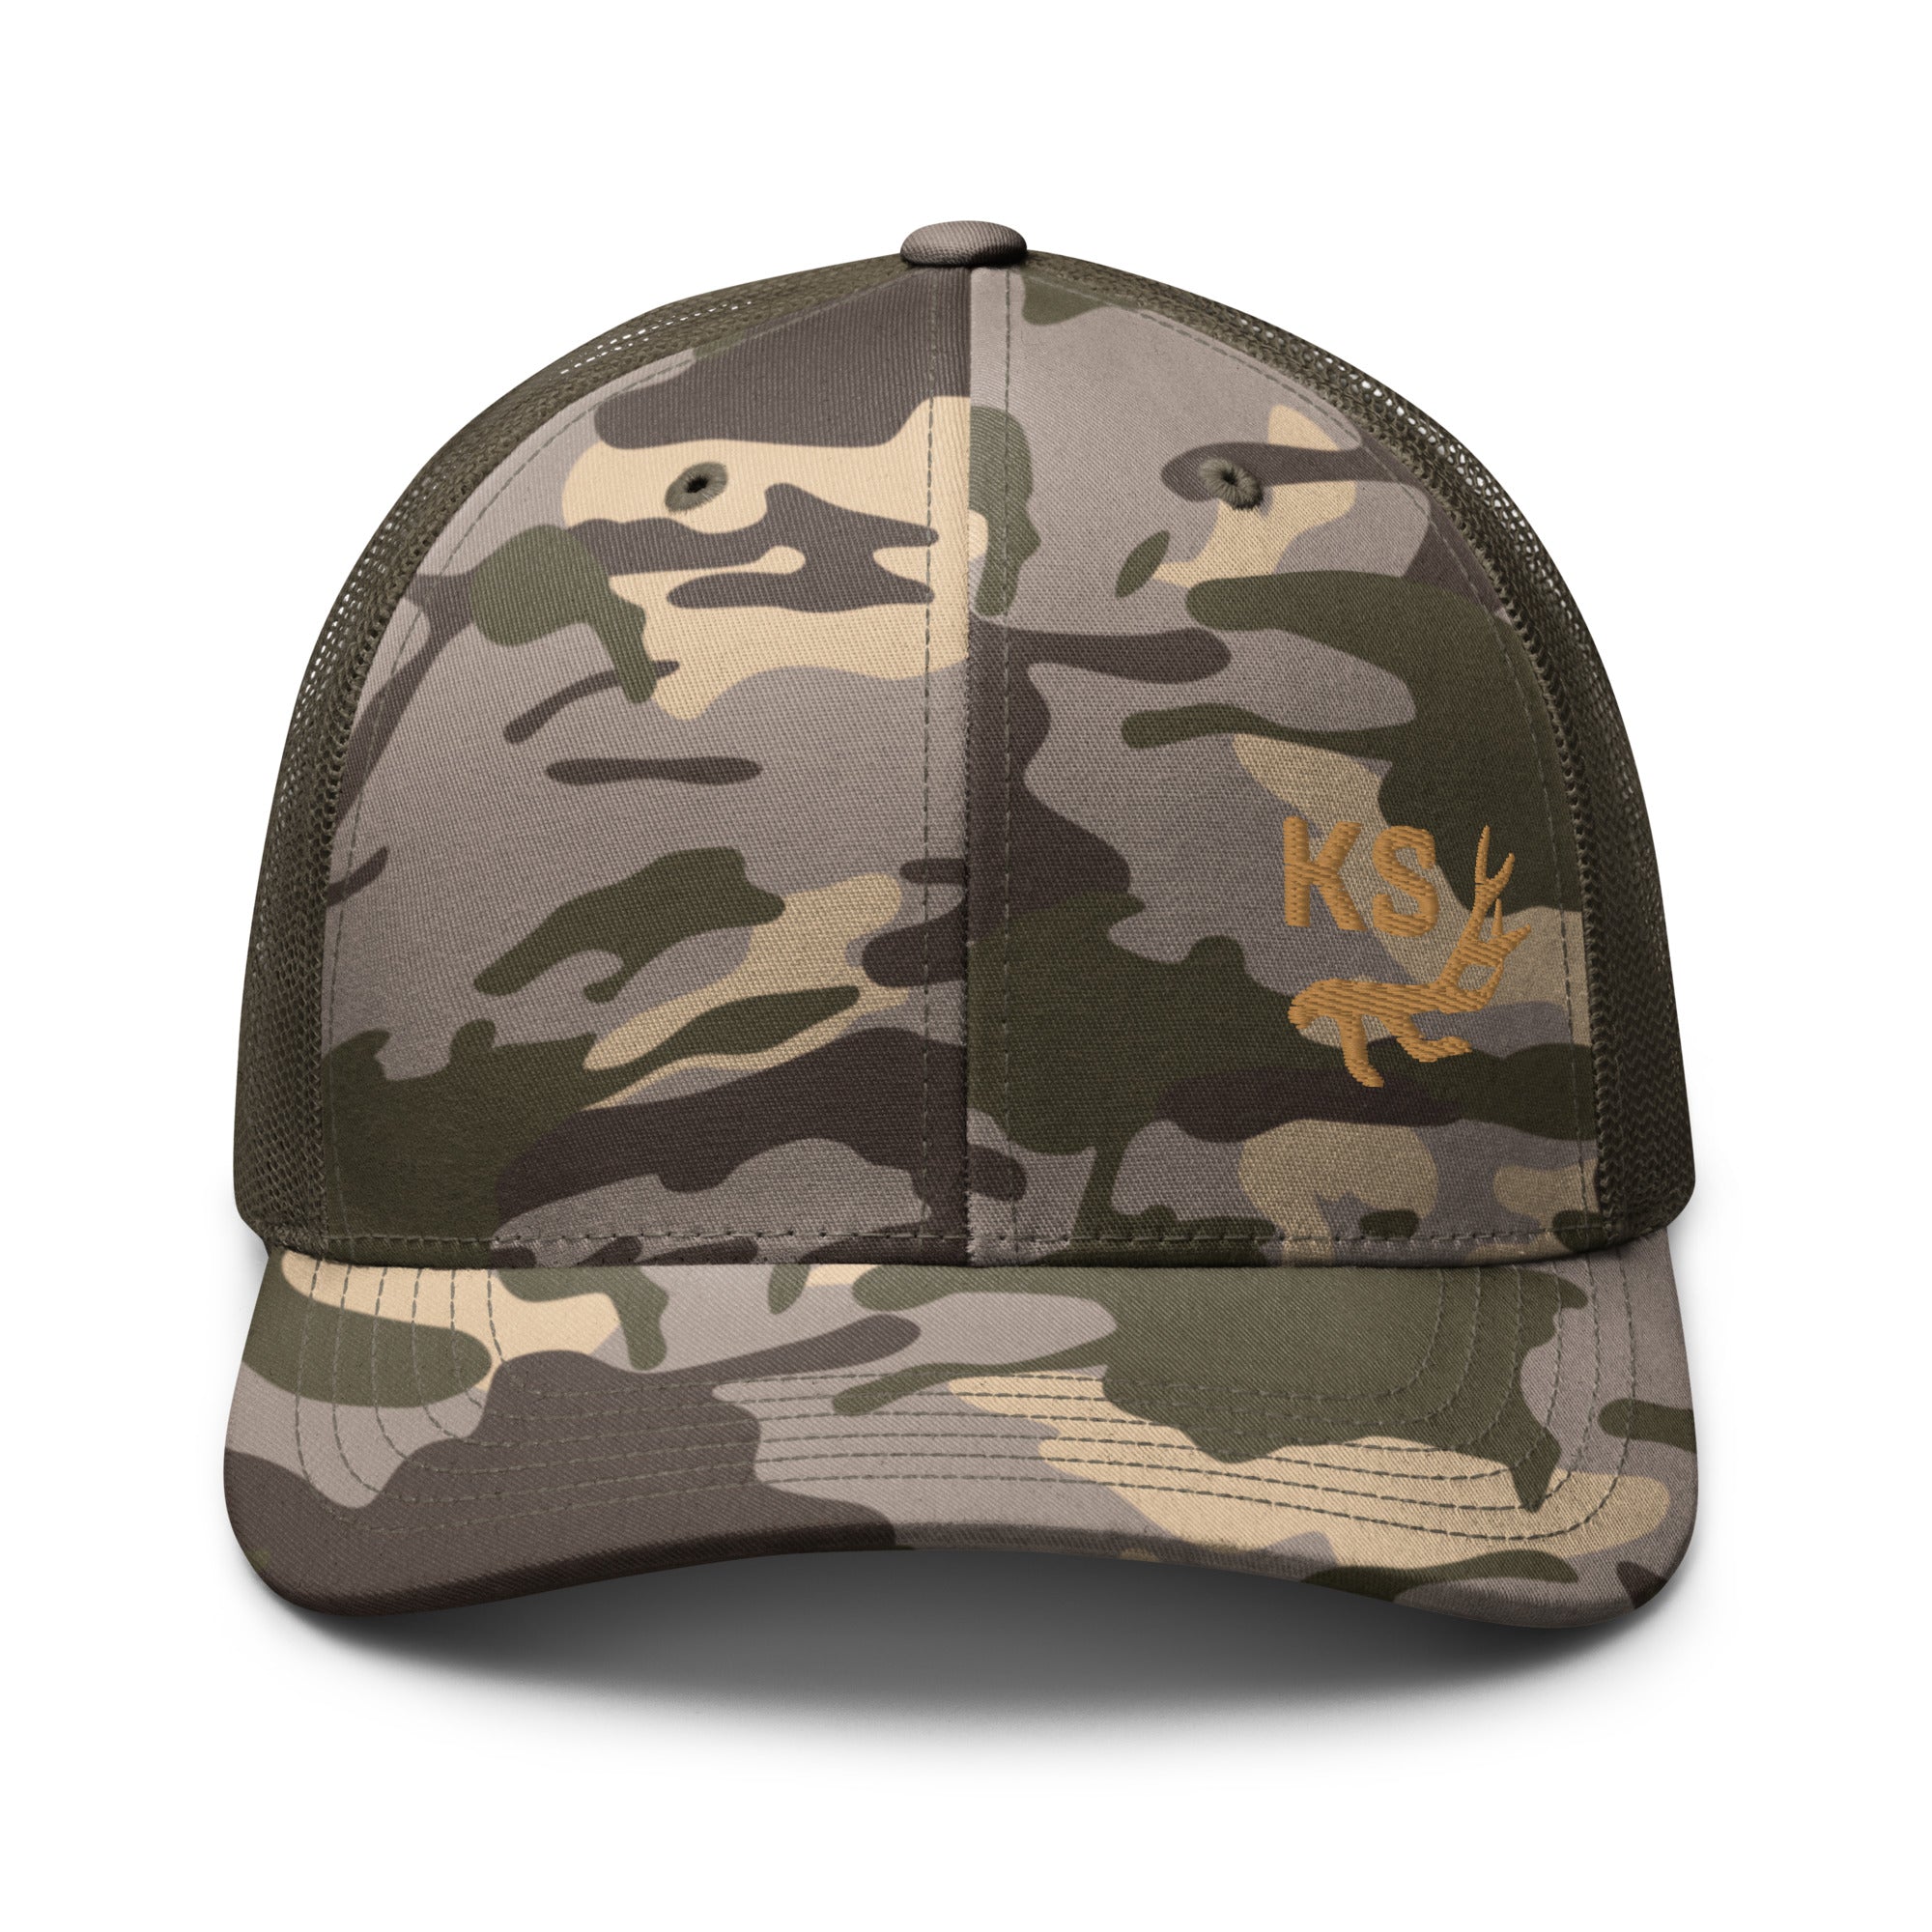 camouflage-trucker-hat-camo-olive-front-655e61579bc69.jpg